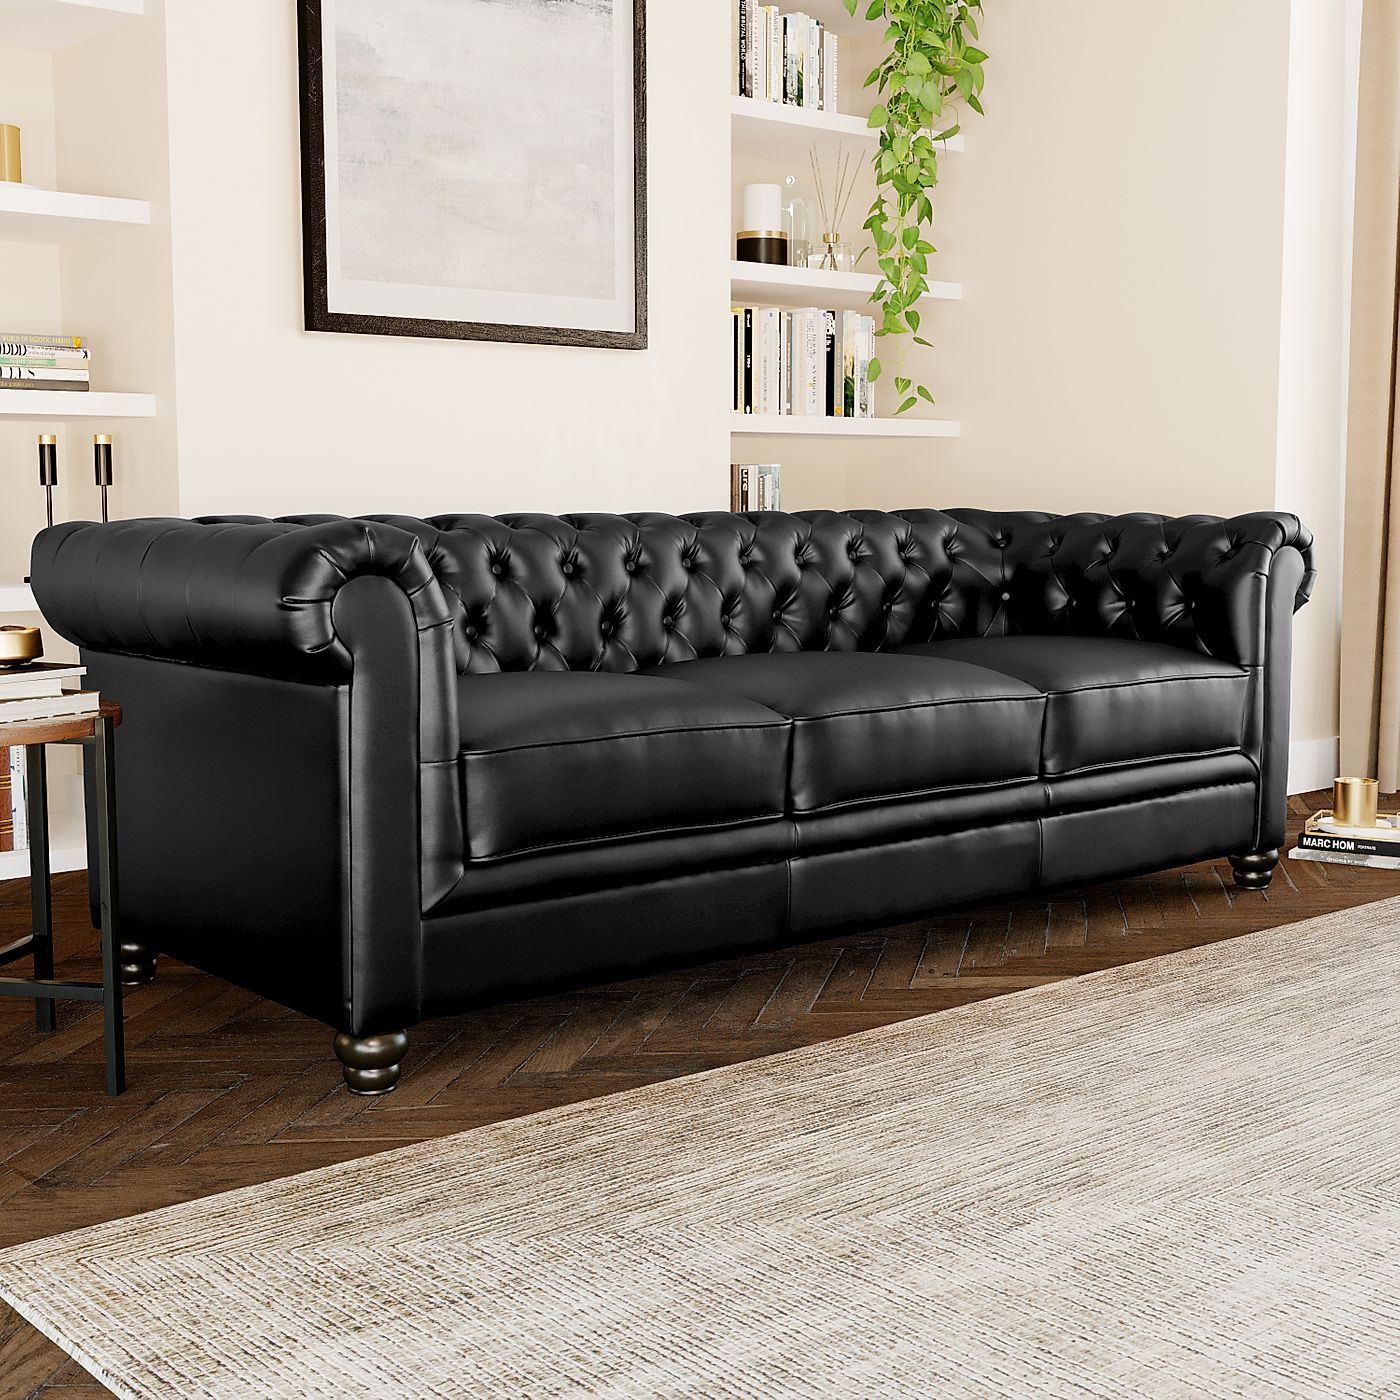 Hampton Black Leather 3 Seater Chesterfield Sofa Intended For 3 Seater Leather Sofas (View 9 of 15)